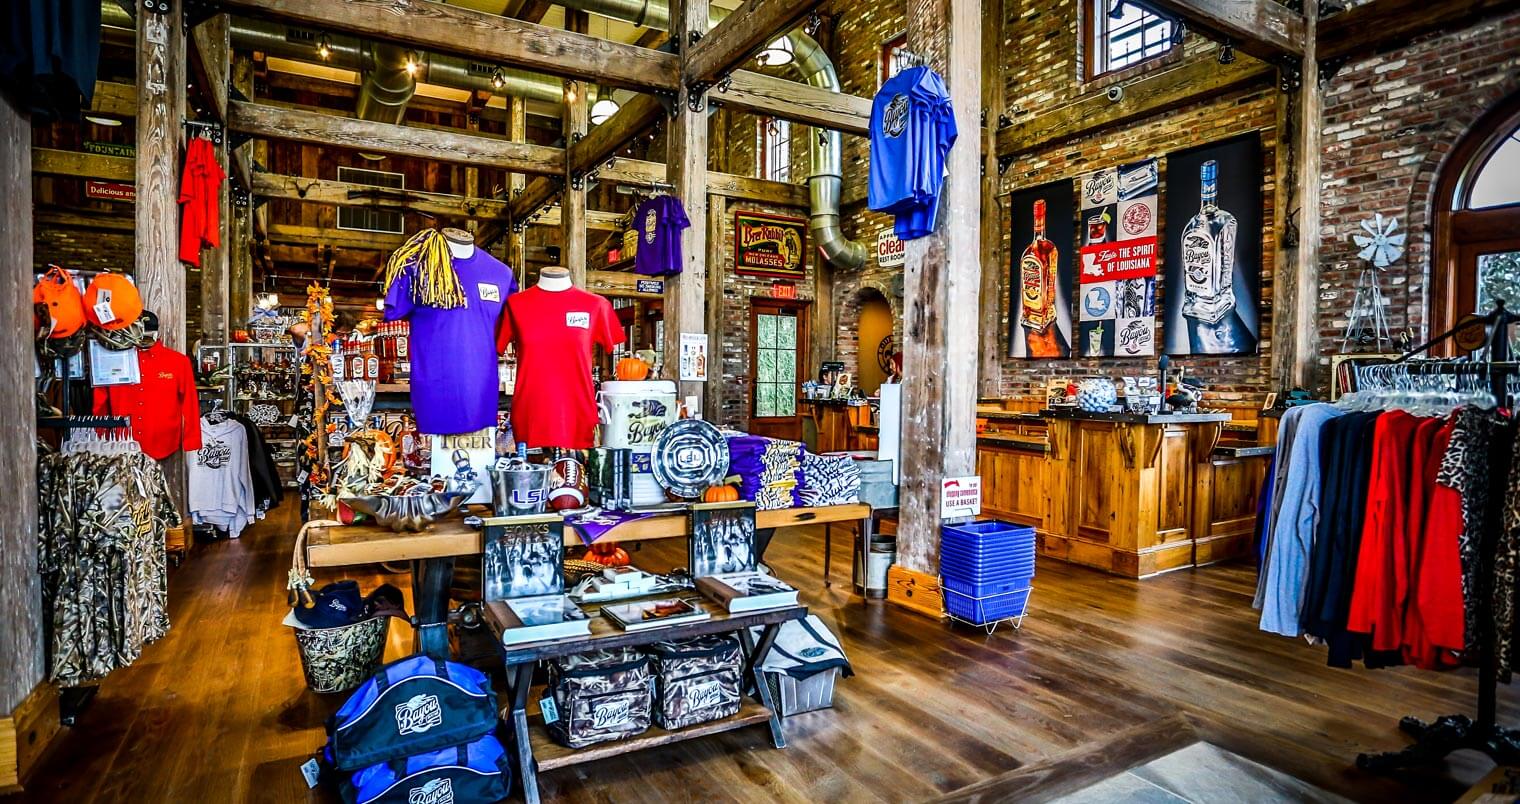 Bayou Rum Distillery Named Best Large-Scale Visitor Center, featured image